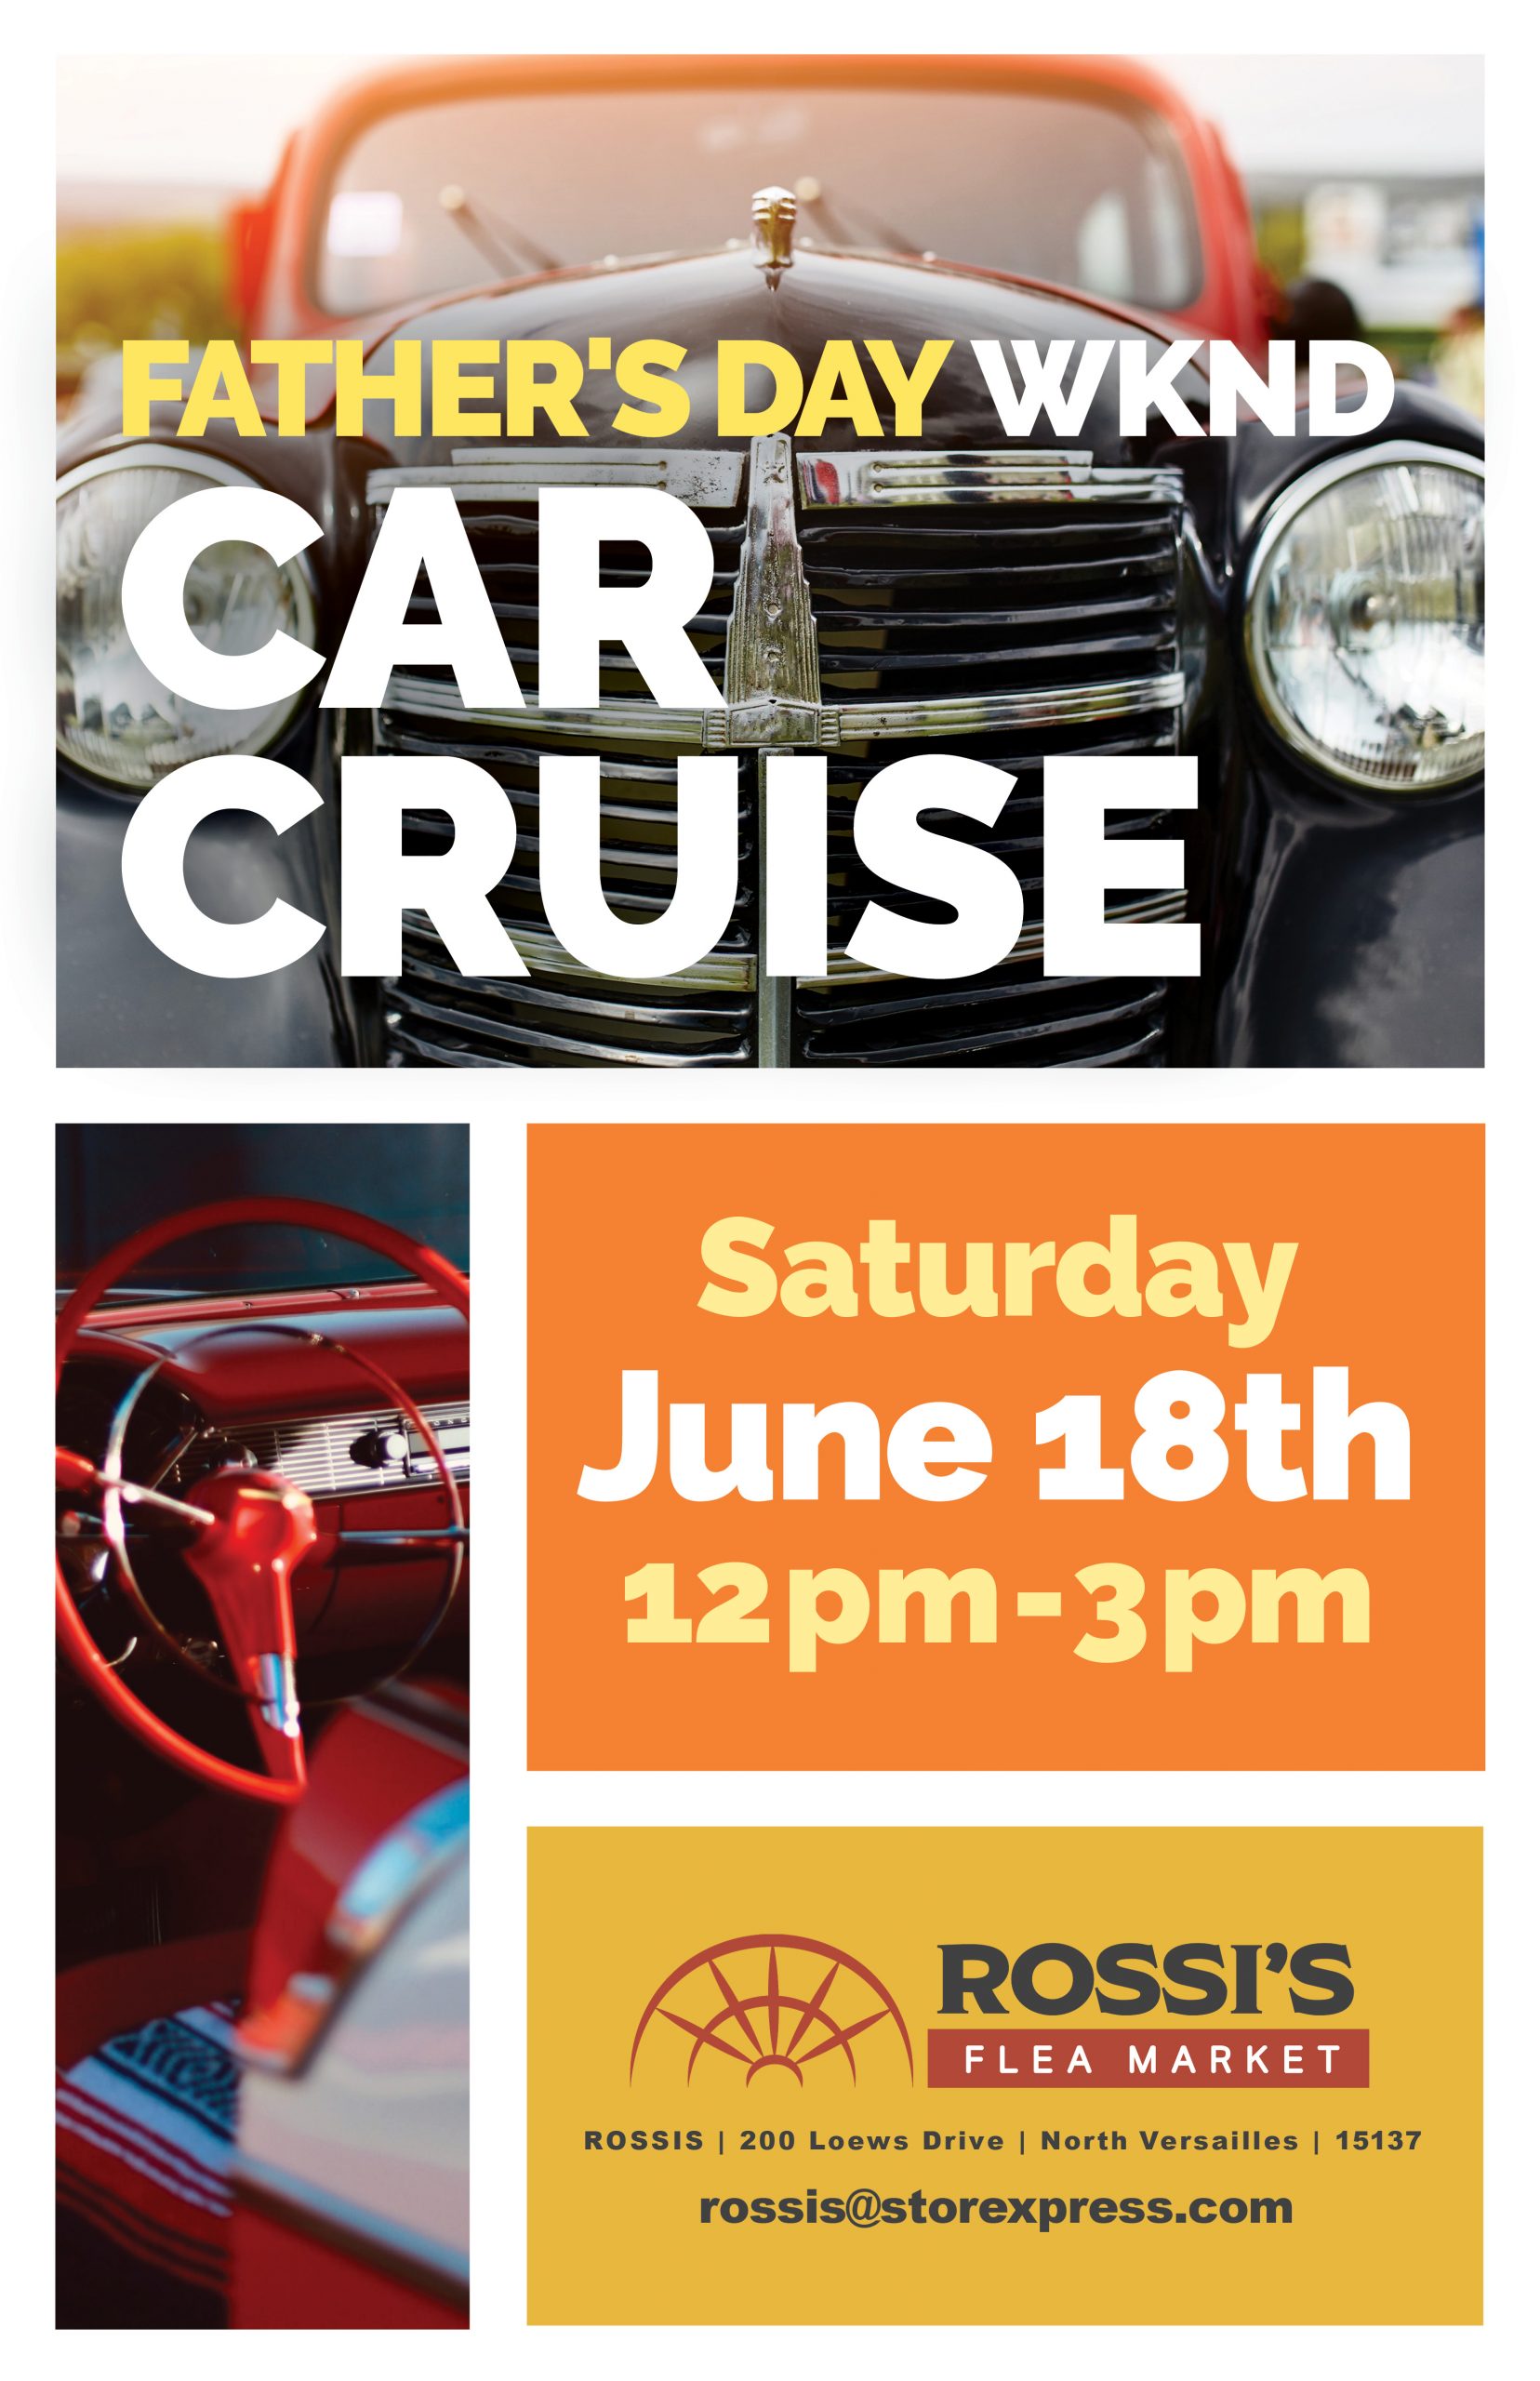 Car Cruise Event- Father's Day weekend